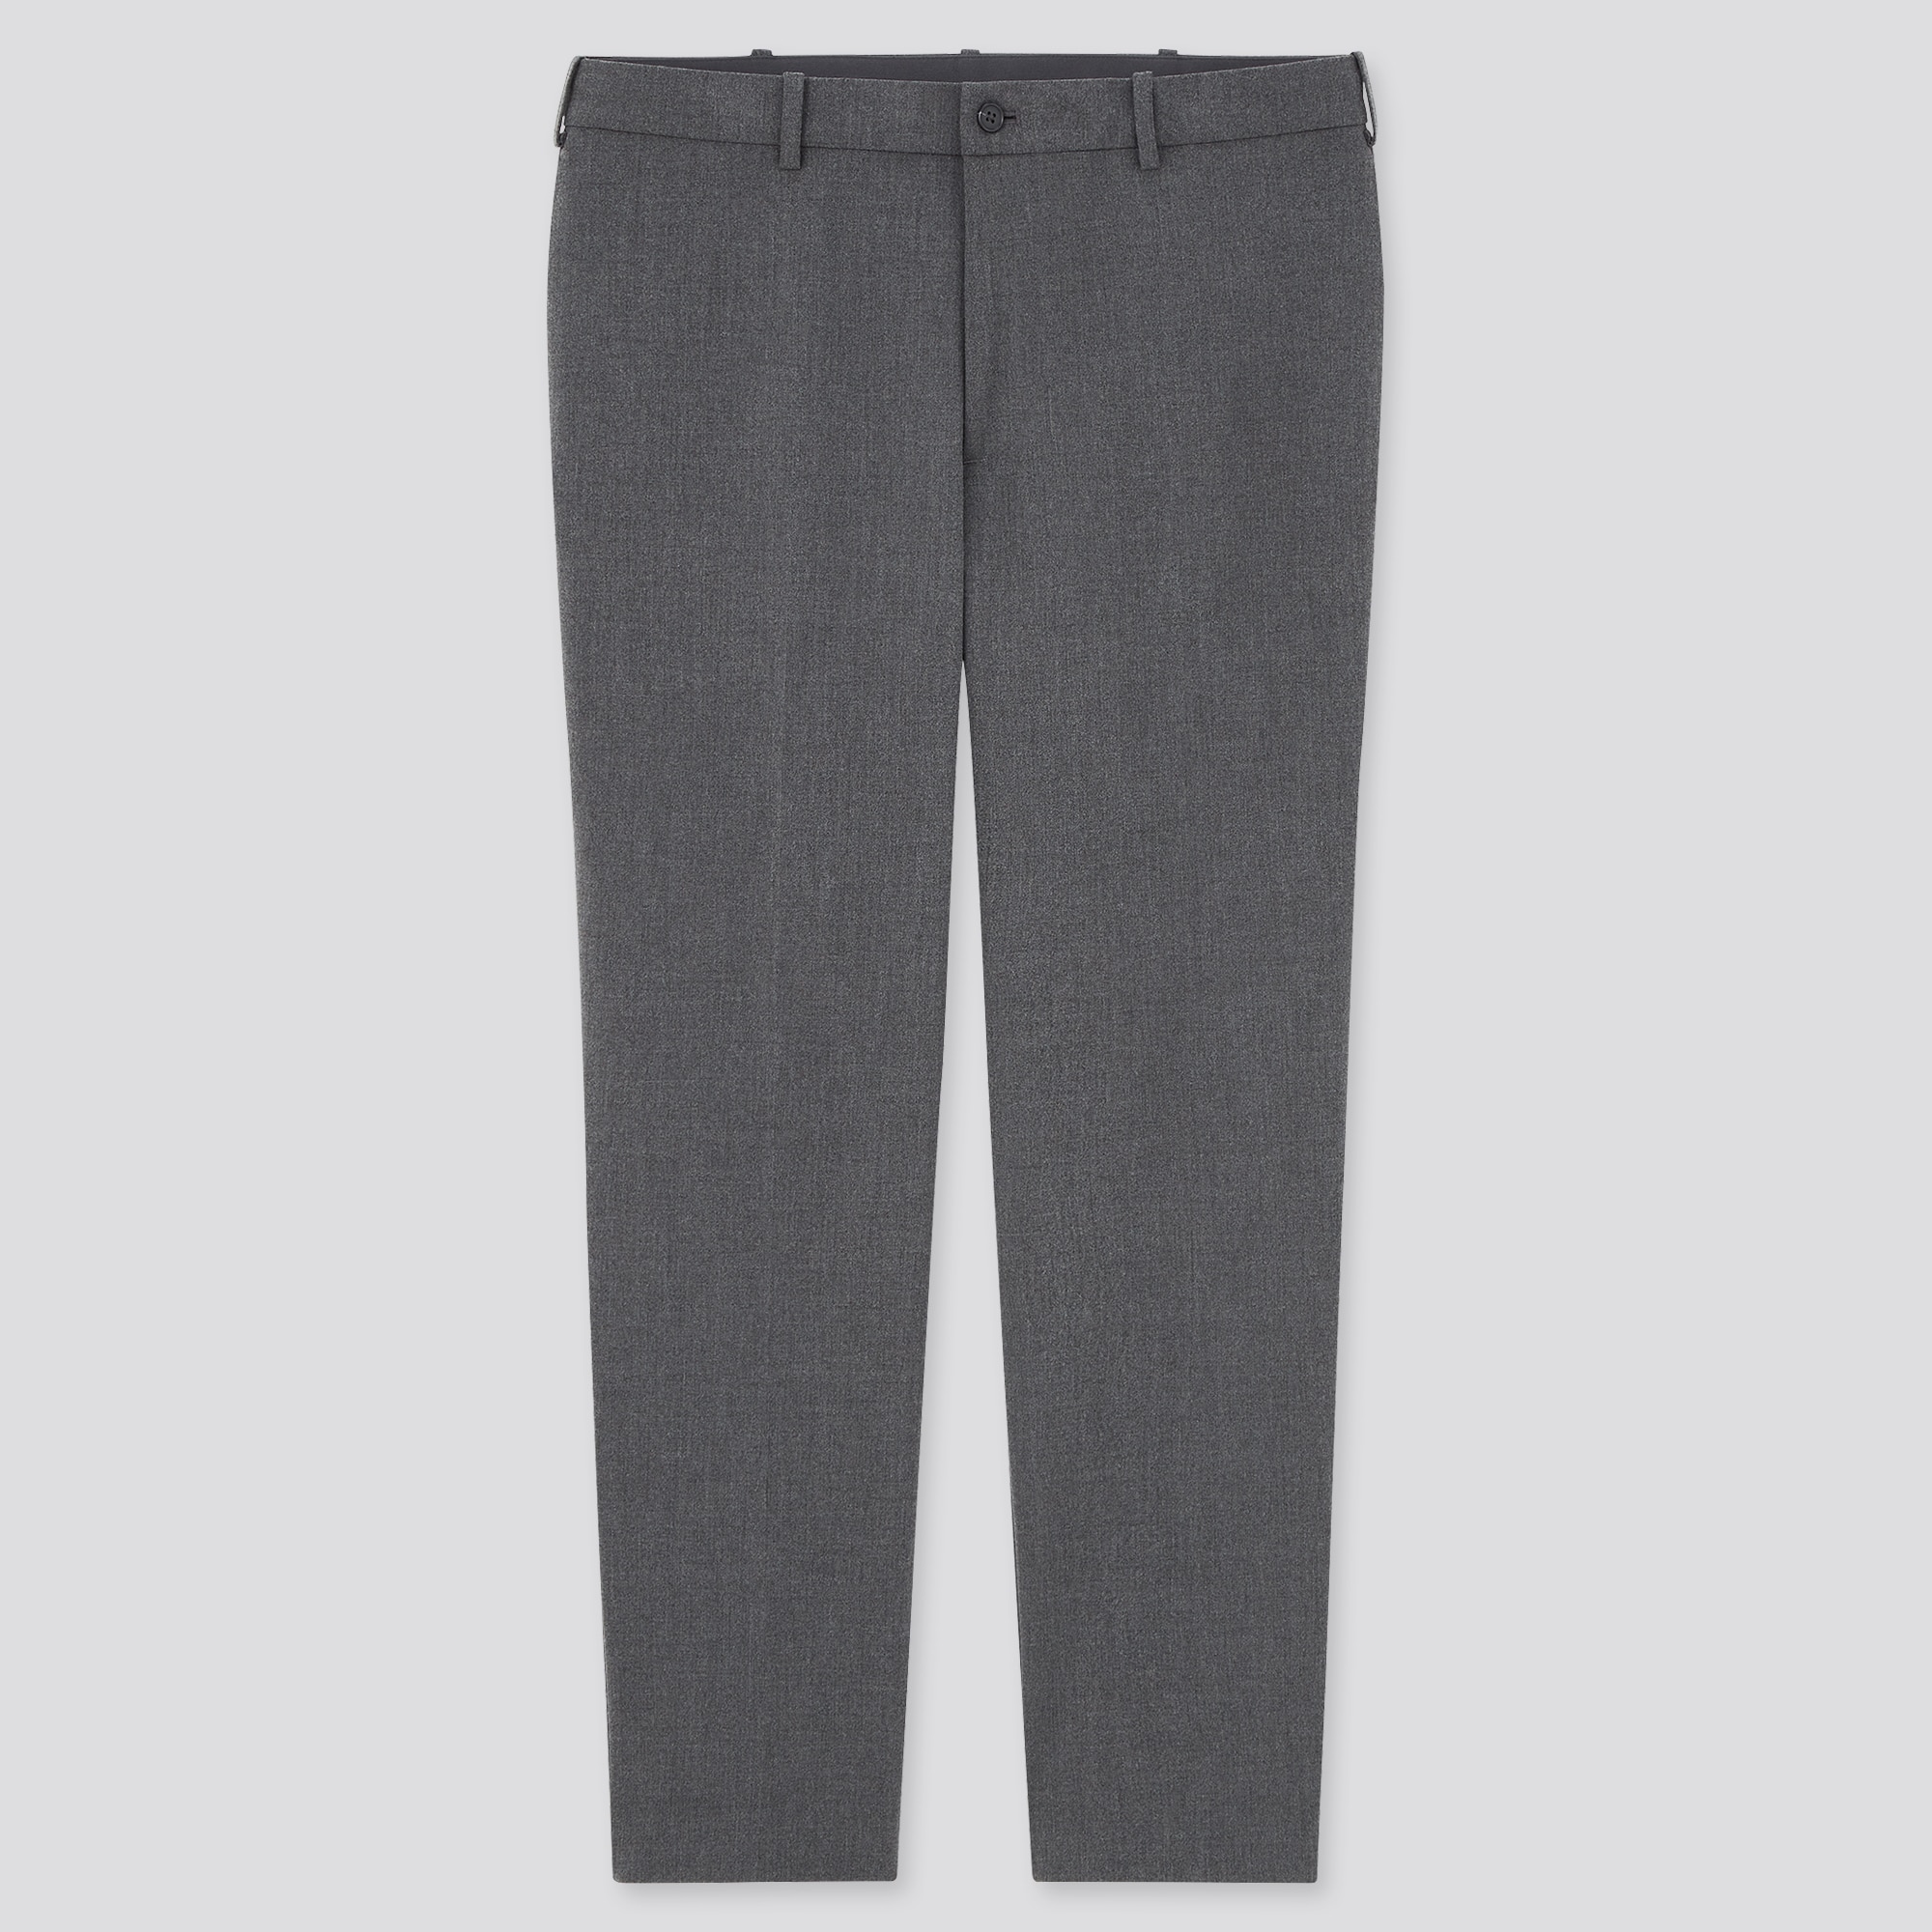 Men Smart Stretch Ankle Length Trousers | UNIQLO UK